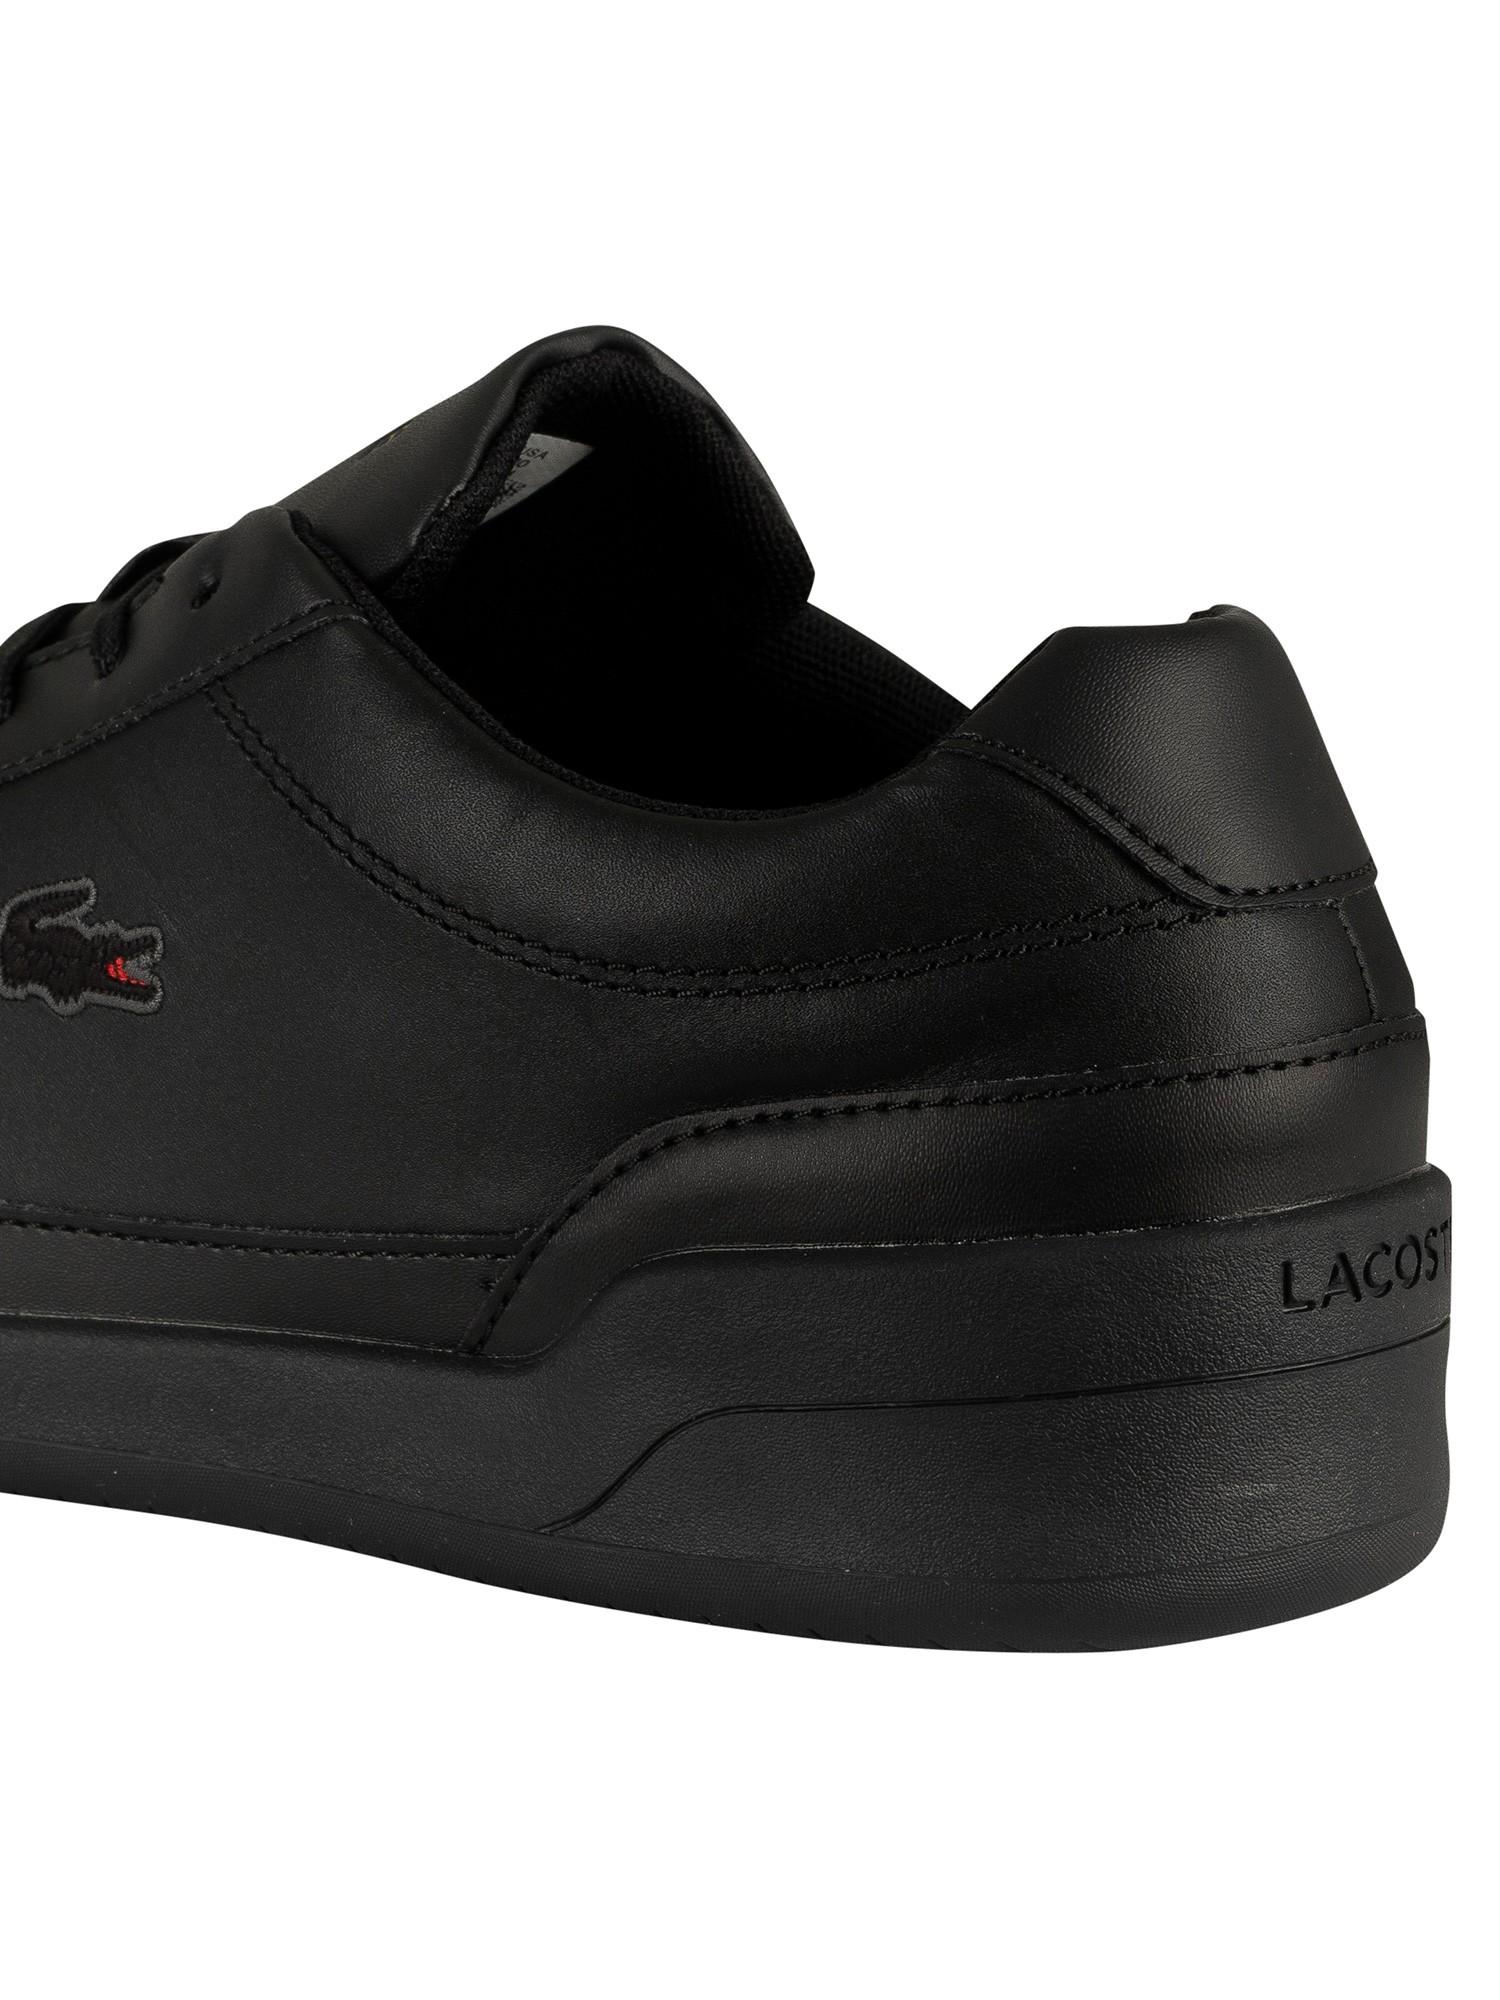 Lacoste Challenge 319 5 Sma Leather Trainers in Black/Black (Black) for Men  - Lyst